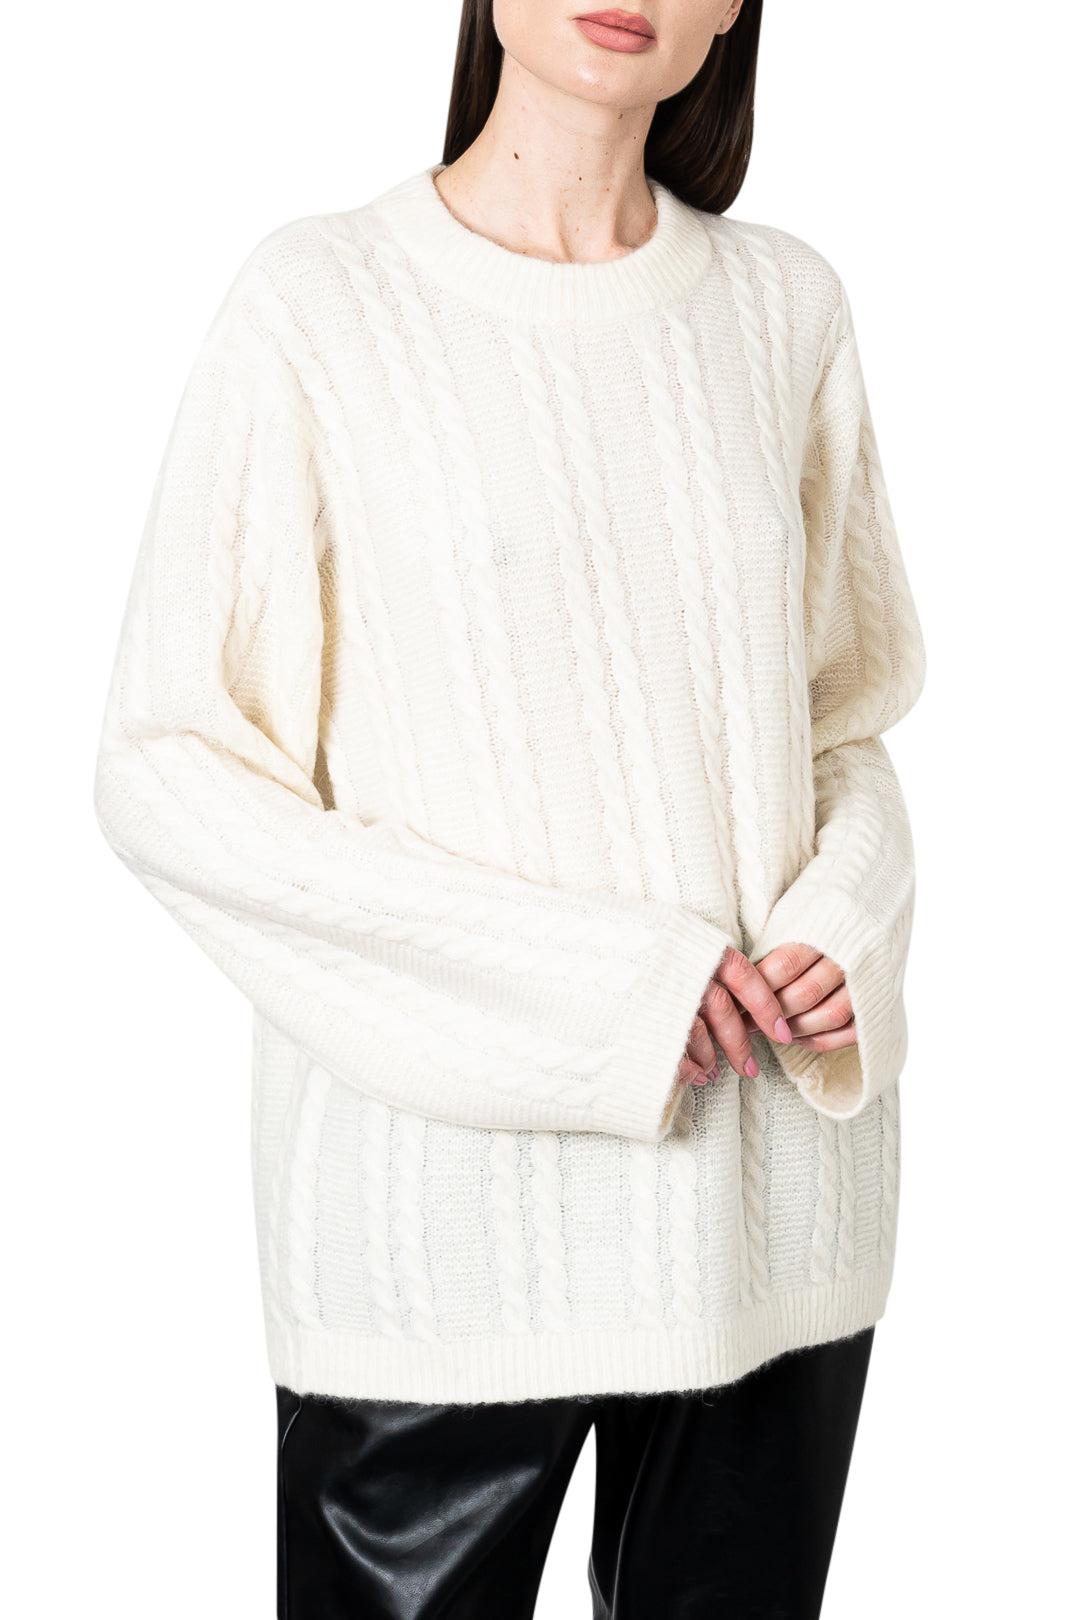 The Garment-Alpaca and wool cable sweater-18240-dgallerystore